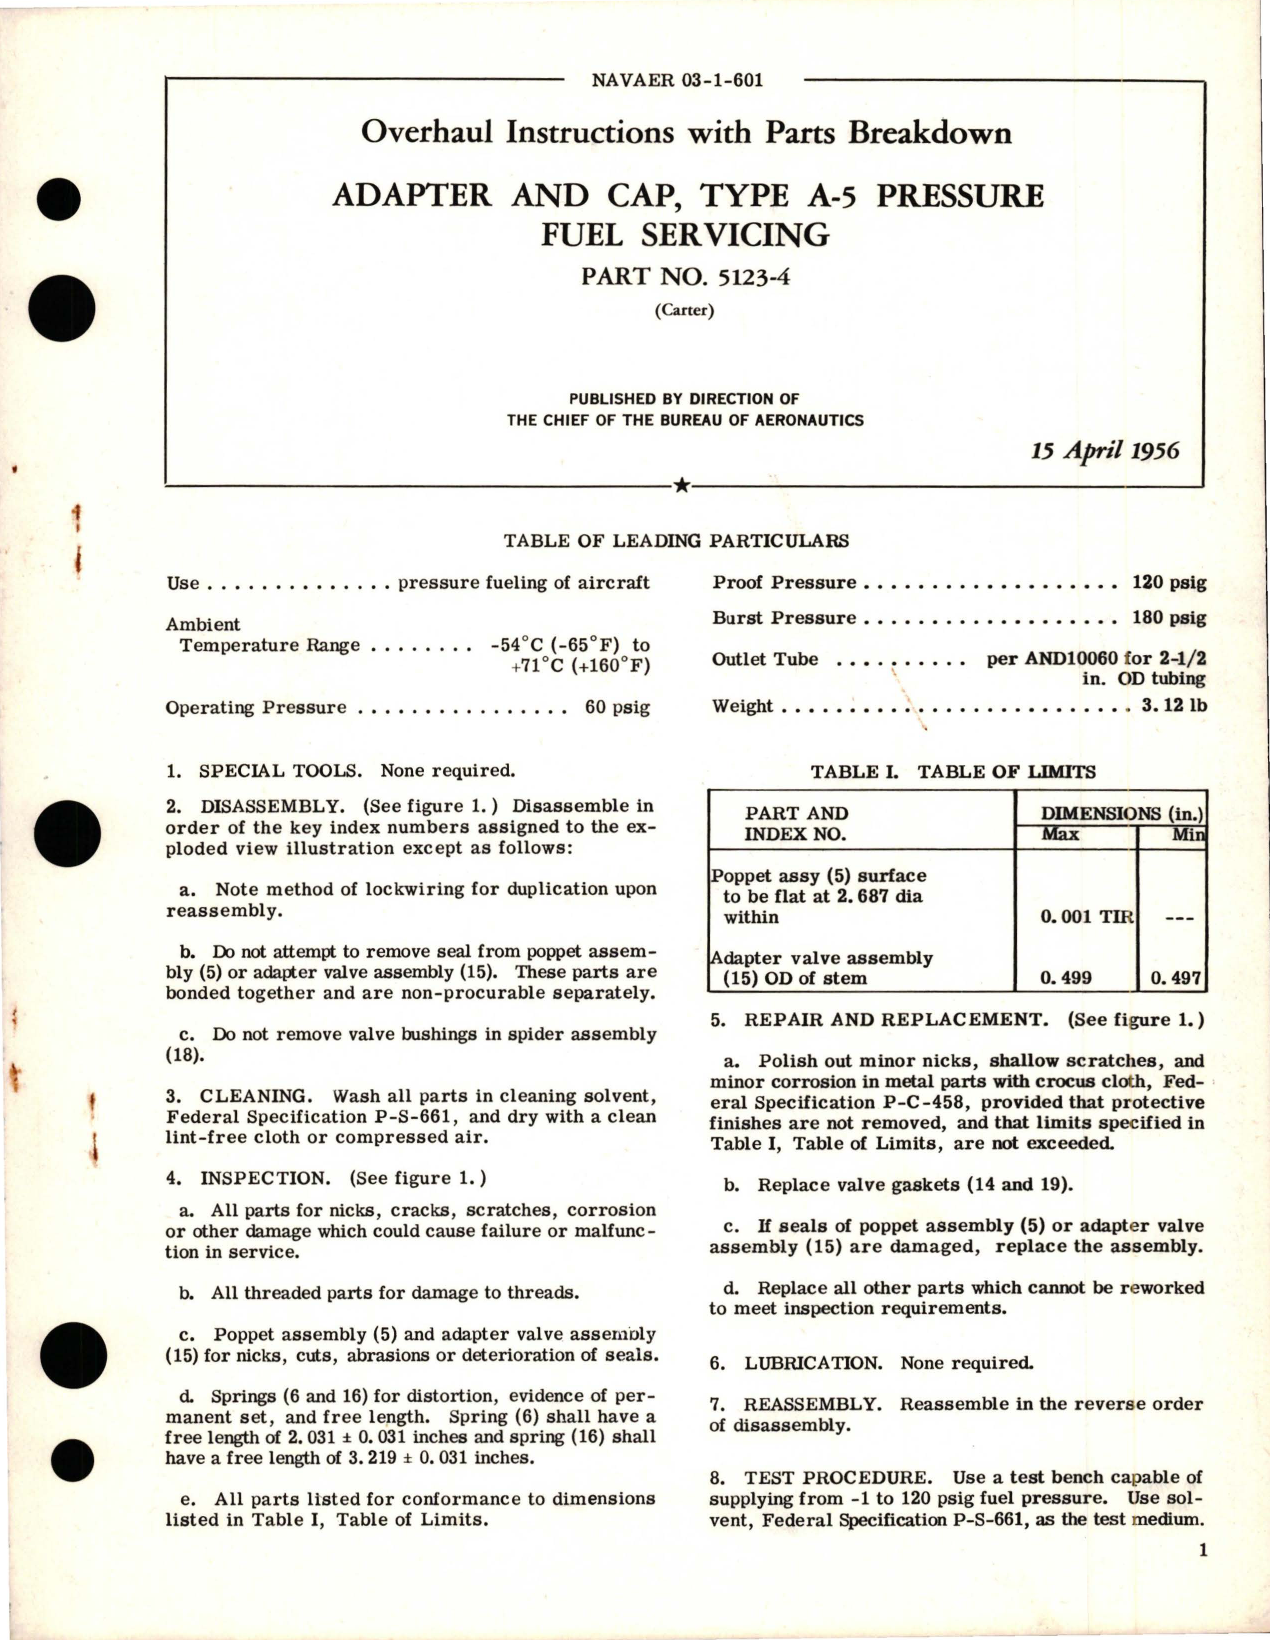 Sample page 1 from AirCorps Library document: Overhaul Instructions with Parts Breakdown for Pressure Fuel Servicing Adapter and Cap - Type A-5 - Part 5123-4